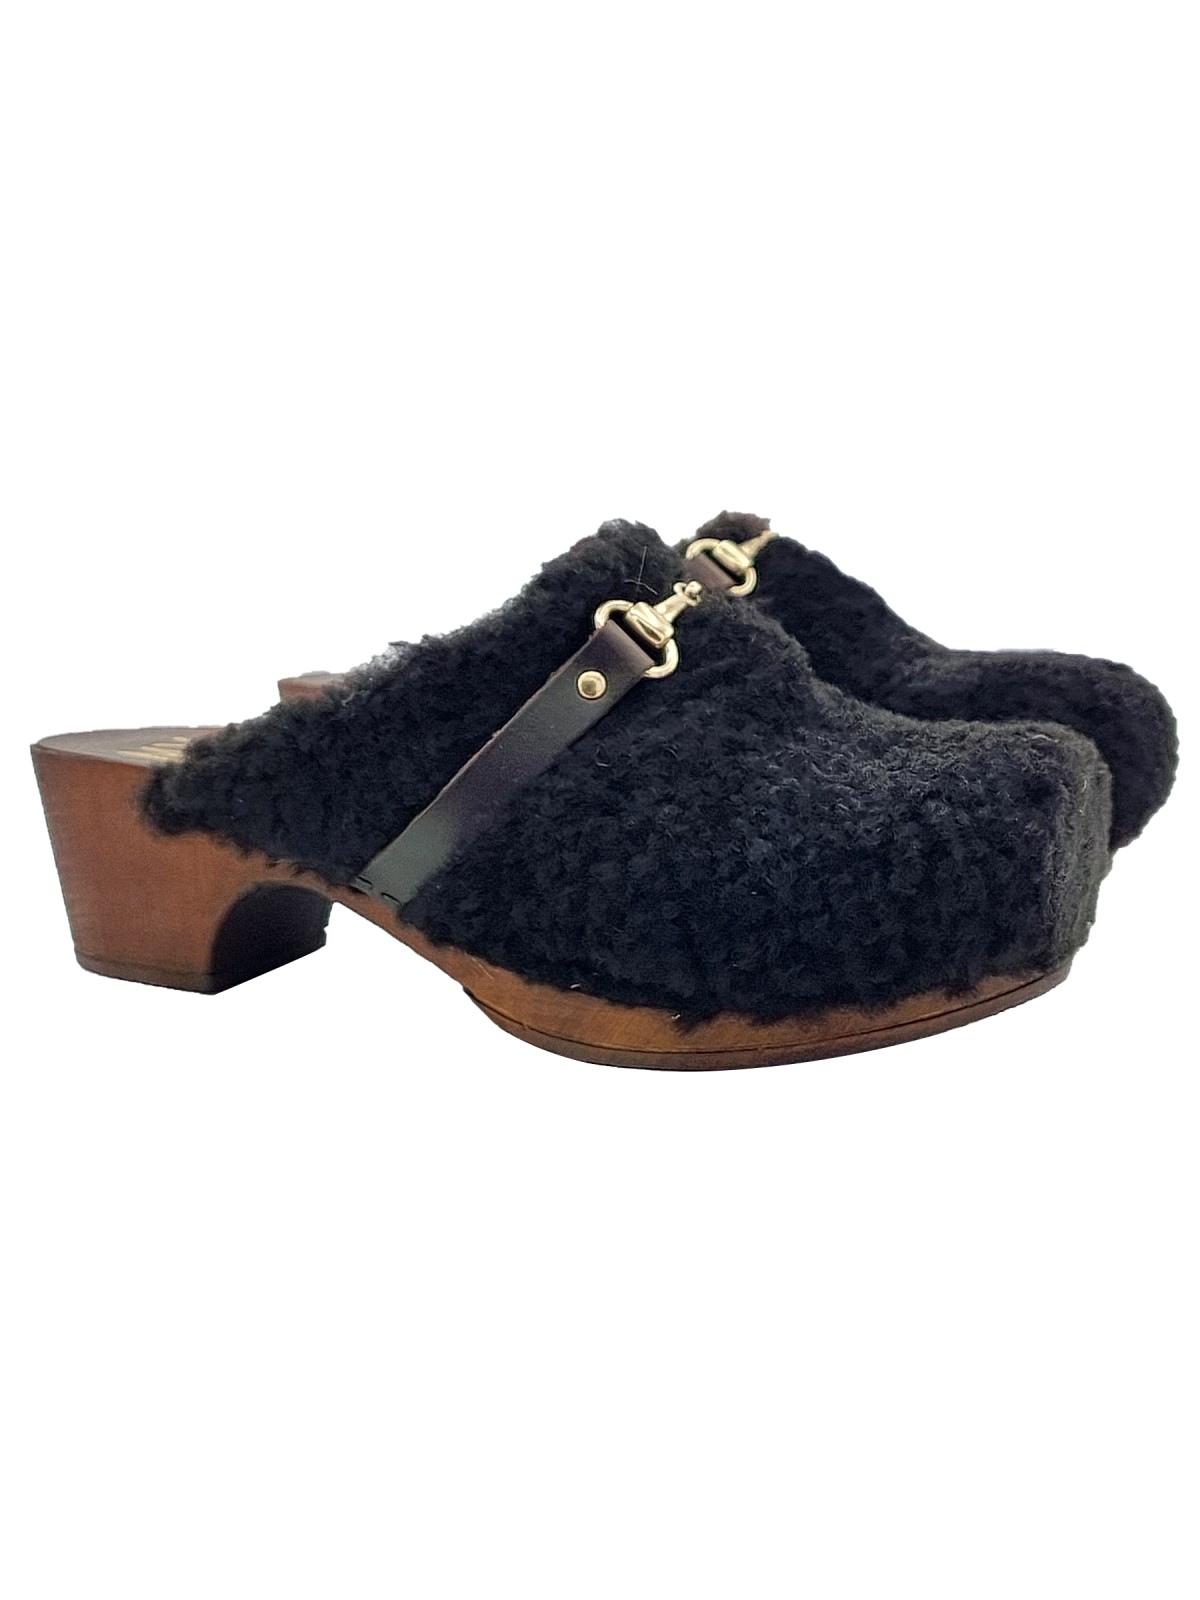 SWEDISH CLOGS IN BLACK SYNTHETIC FUR